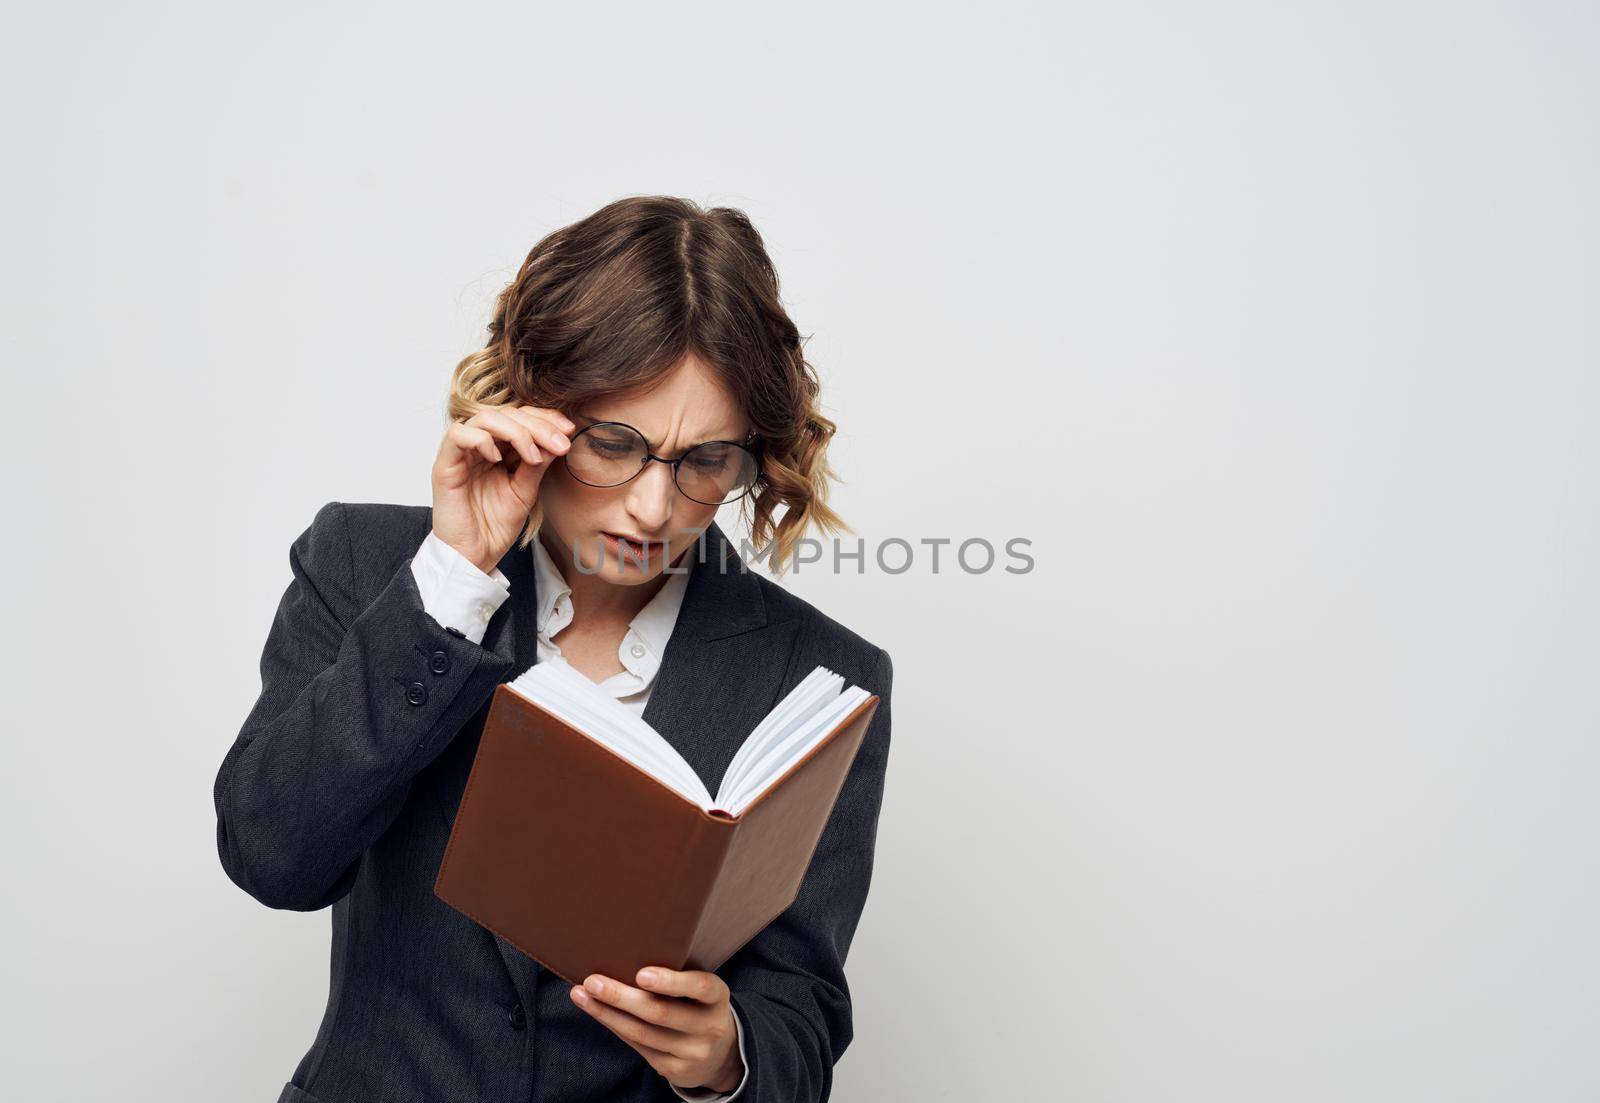 Woman documents glasses classic suit business finance Copy Space. High quality photo